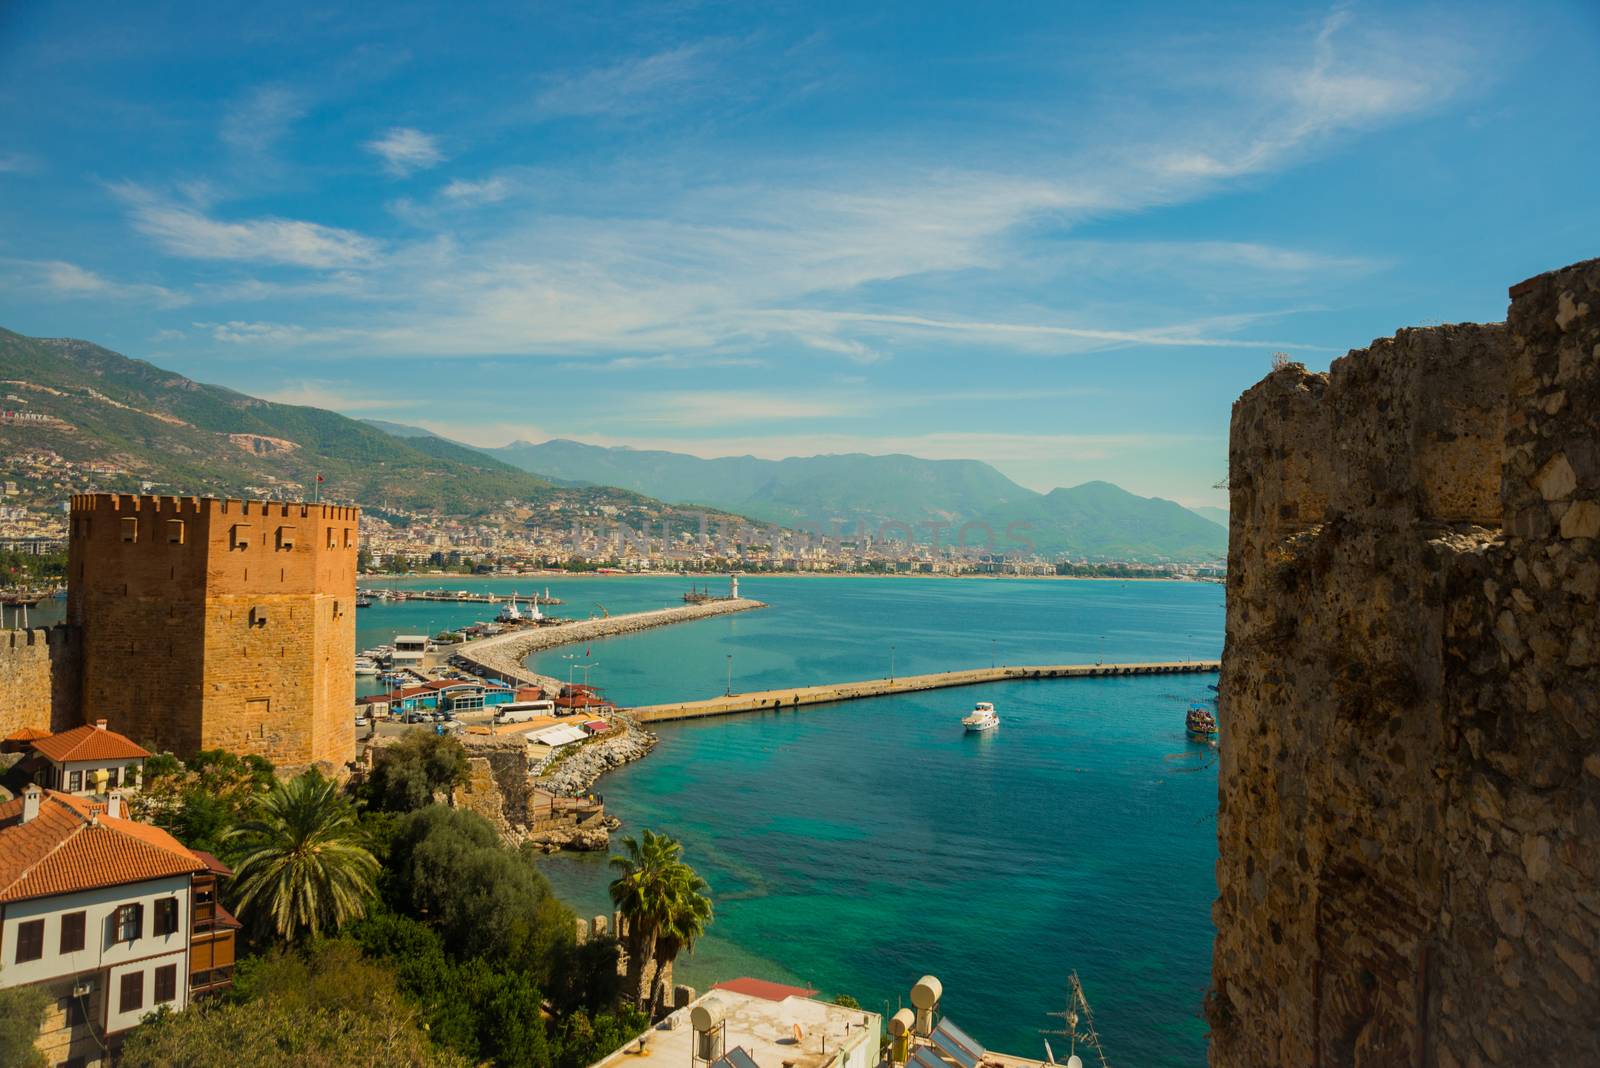 Kizil Kule tower. Top view of the lighthouse at the port in Alanya, Antalya district, Turkey, Asia. Famous tourist destination with high mountains. Part of ancient old Castle. Summer bright day